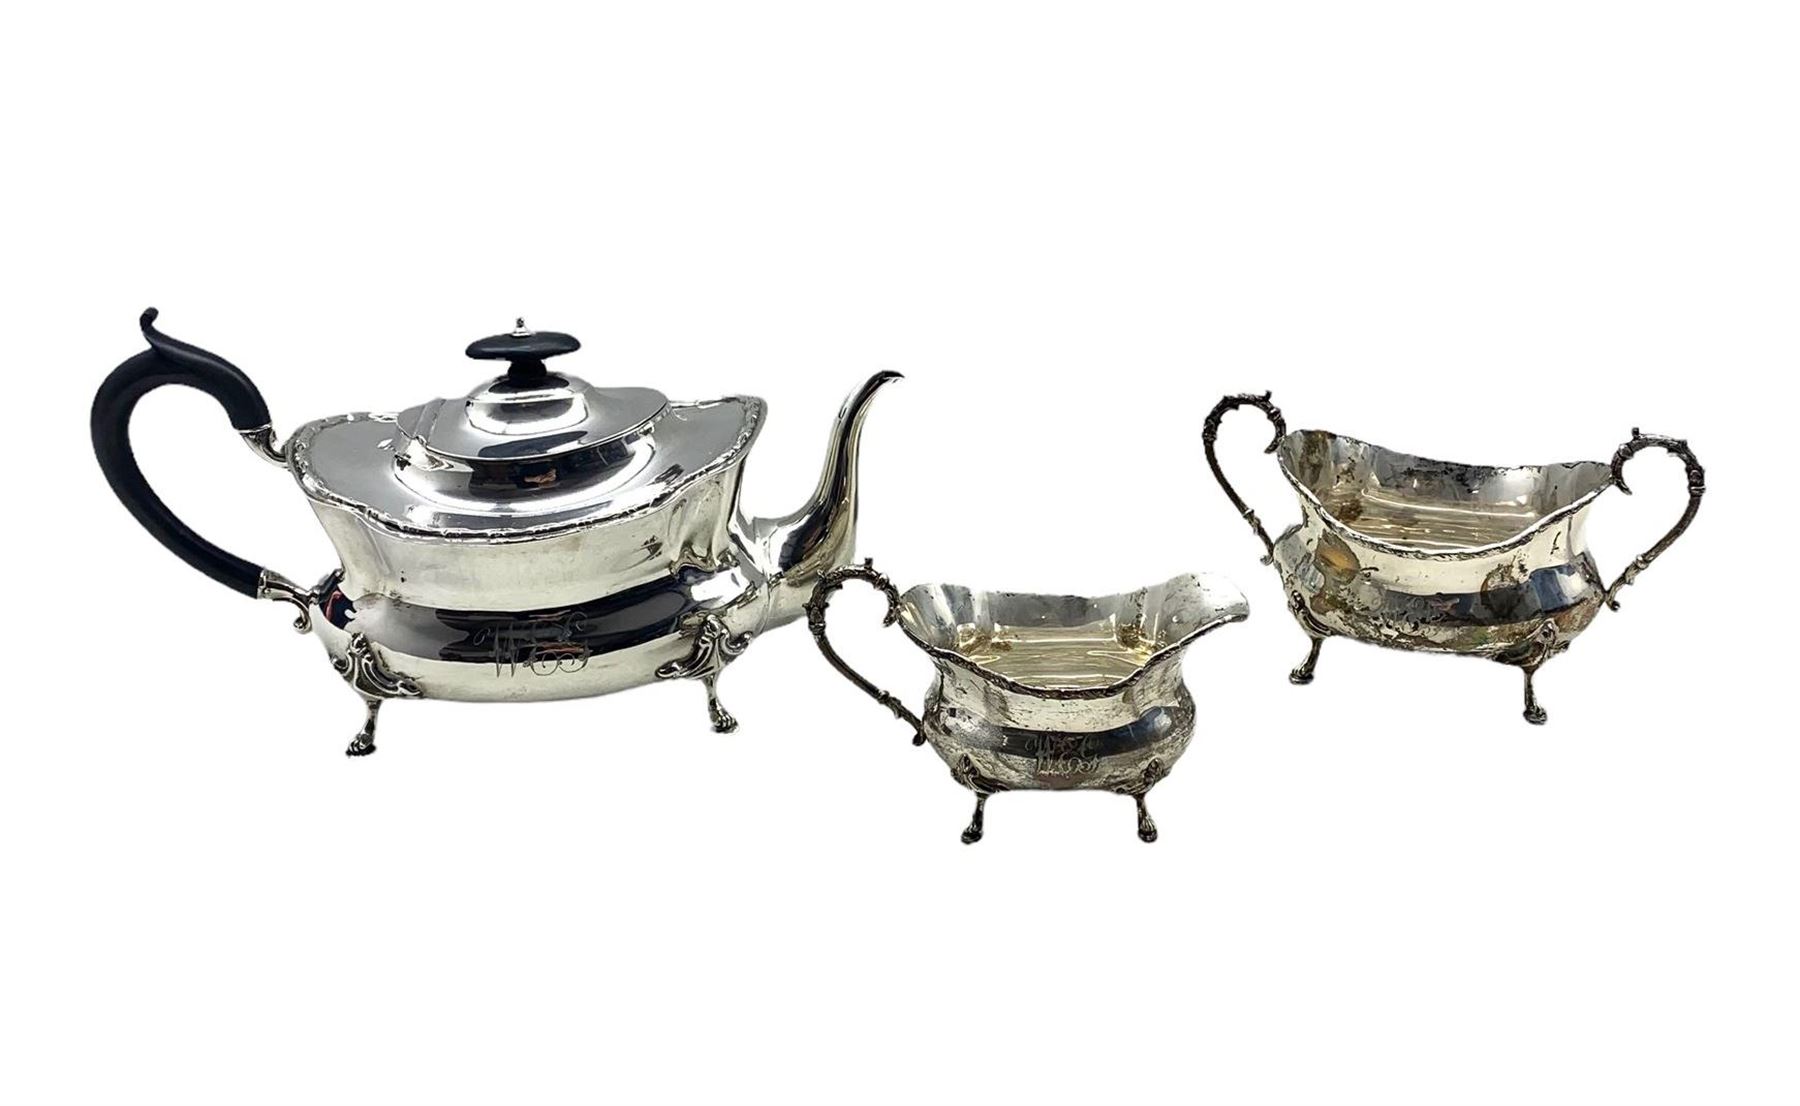 Edwardian silver three piece tea set of oblong form engraved with monogram